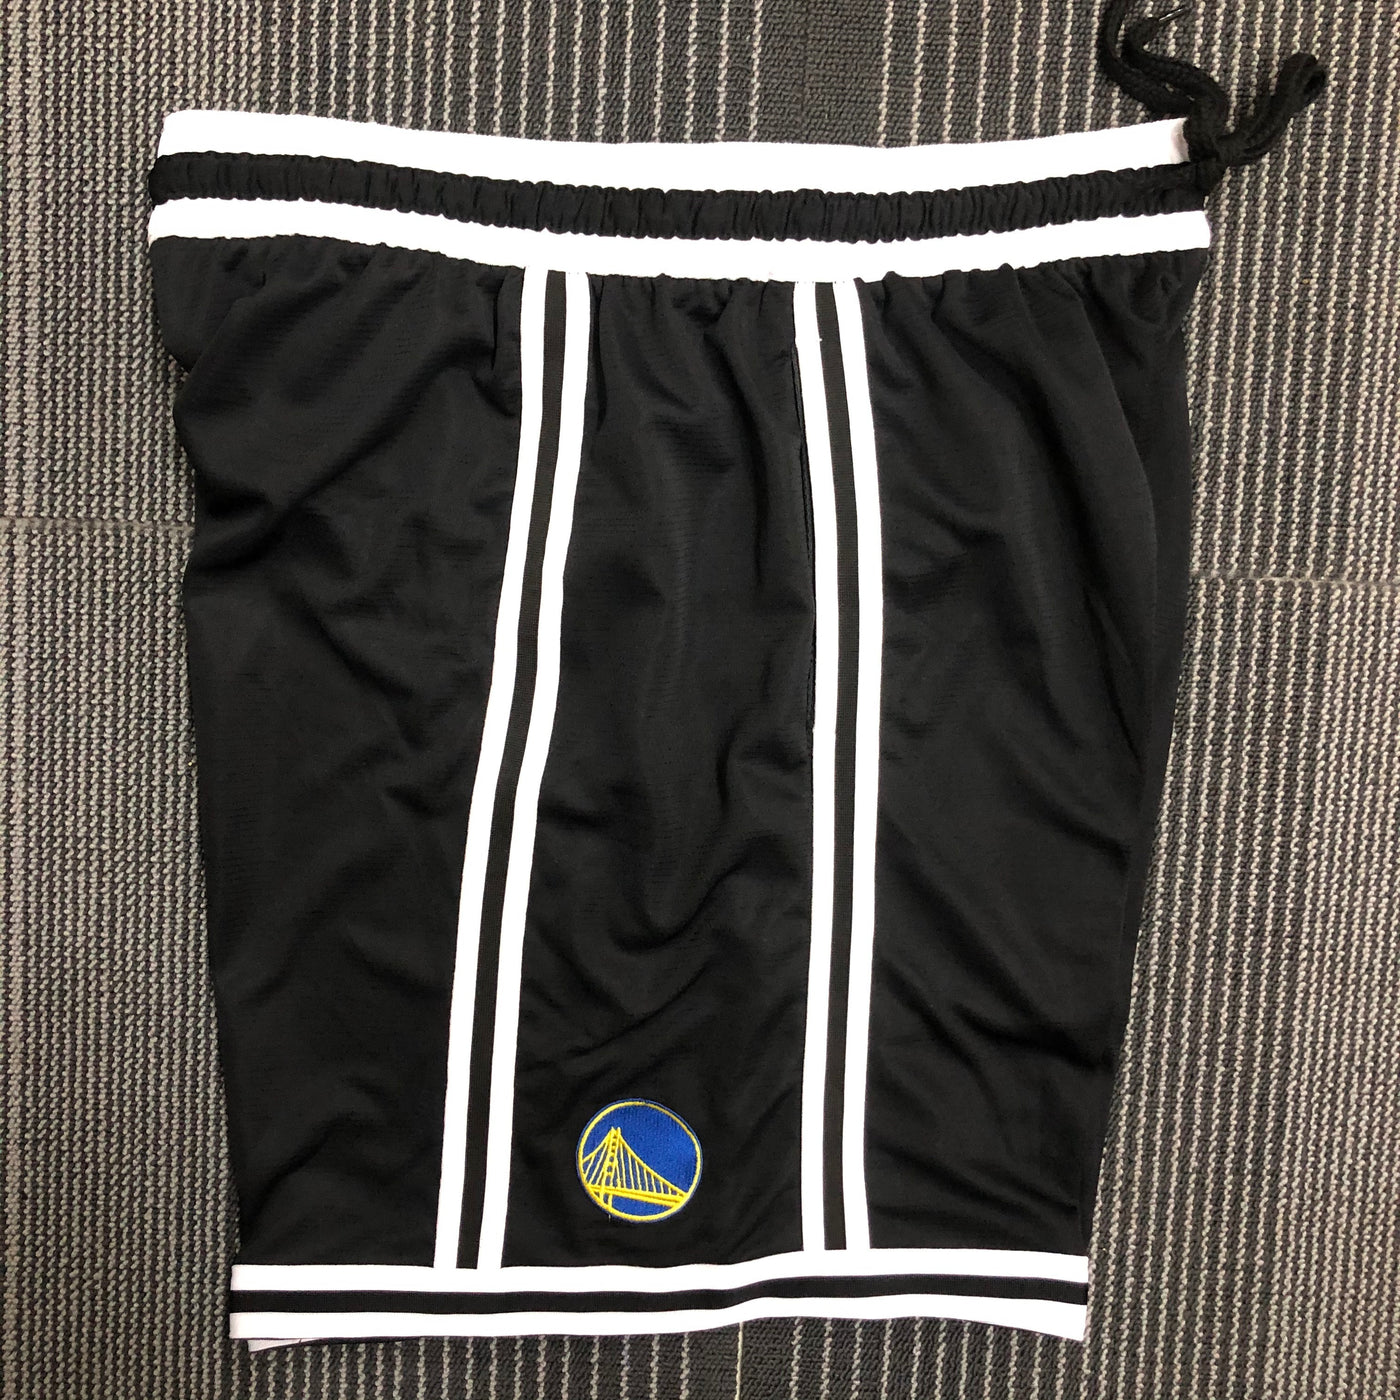 SHORTS Golden State Warriors Loose Fit